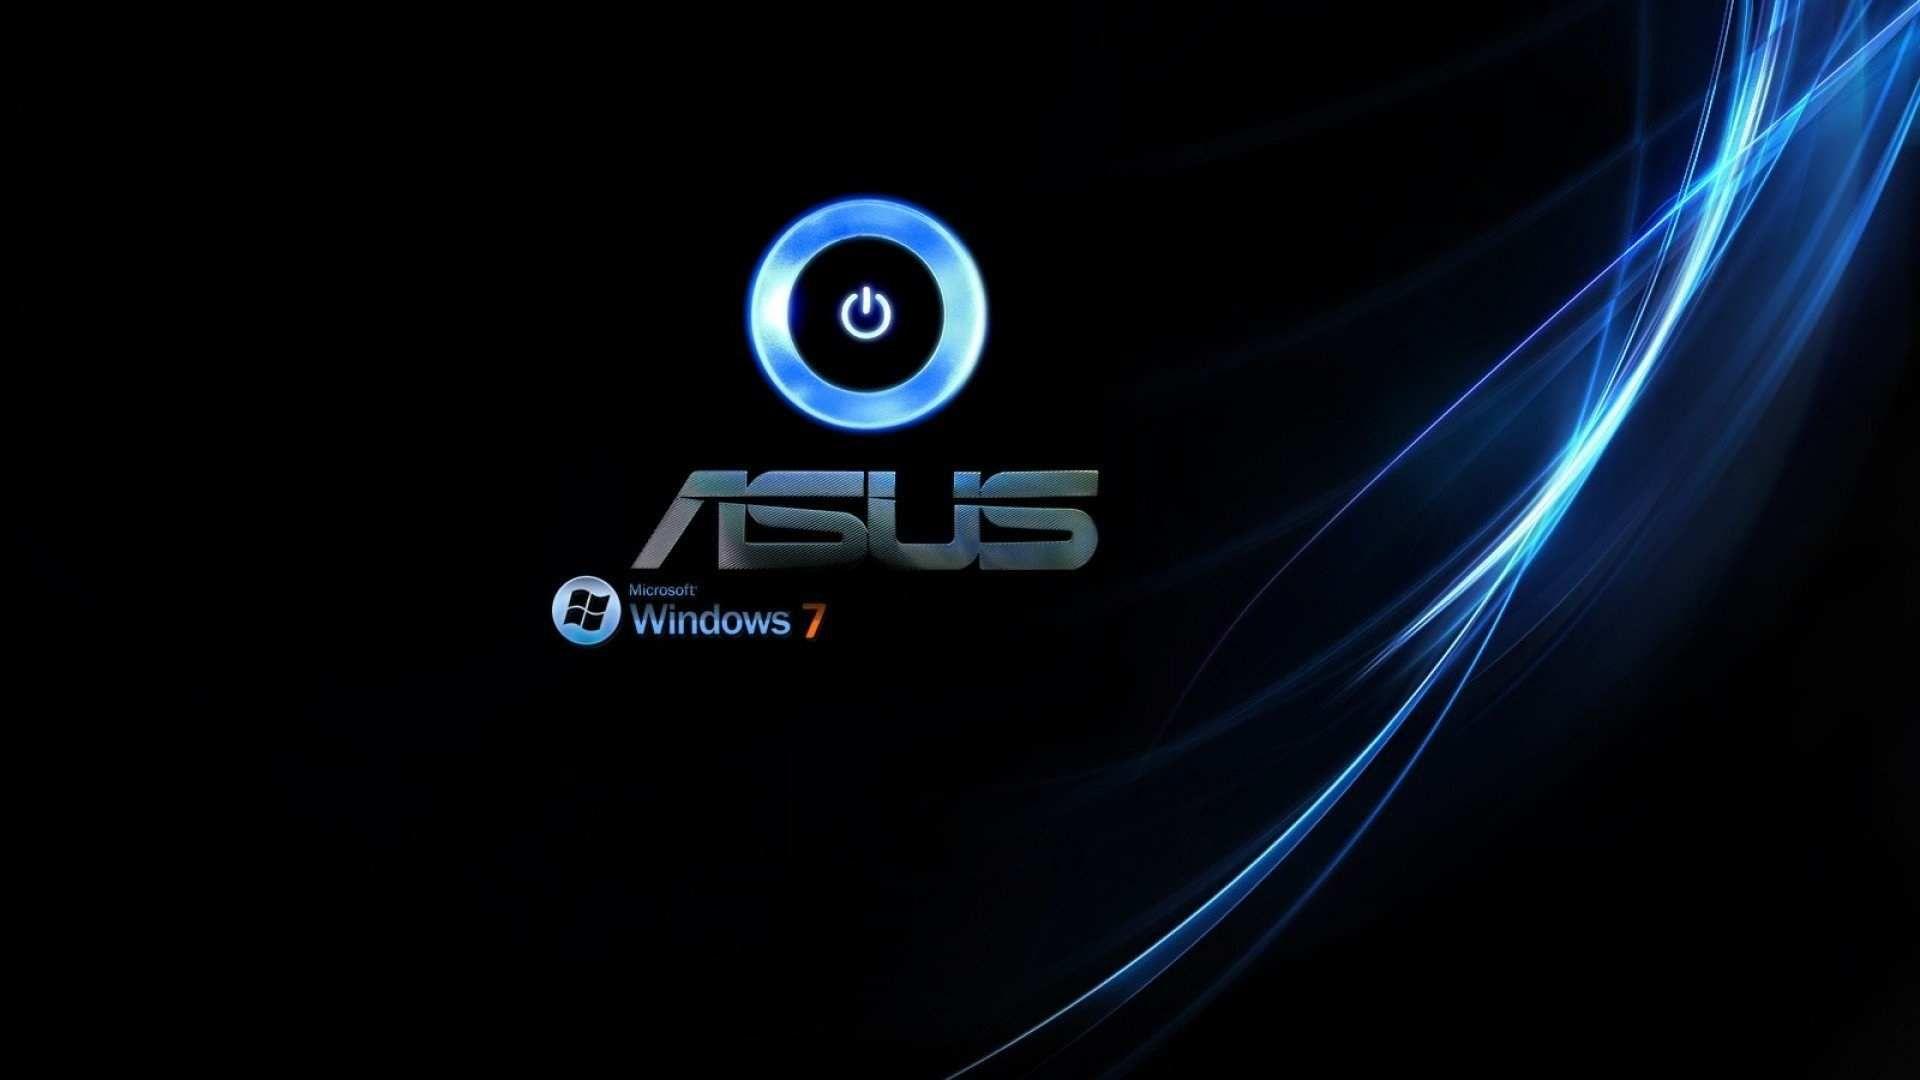 Asus Hd Wallpapers Top Free Asus Hd Backgrounds Wallpaperaccess